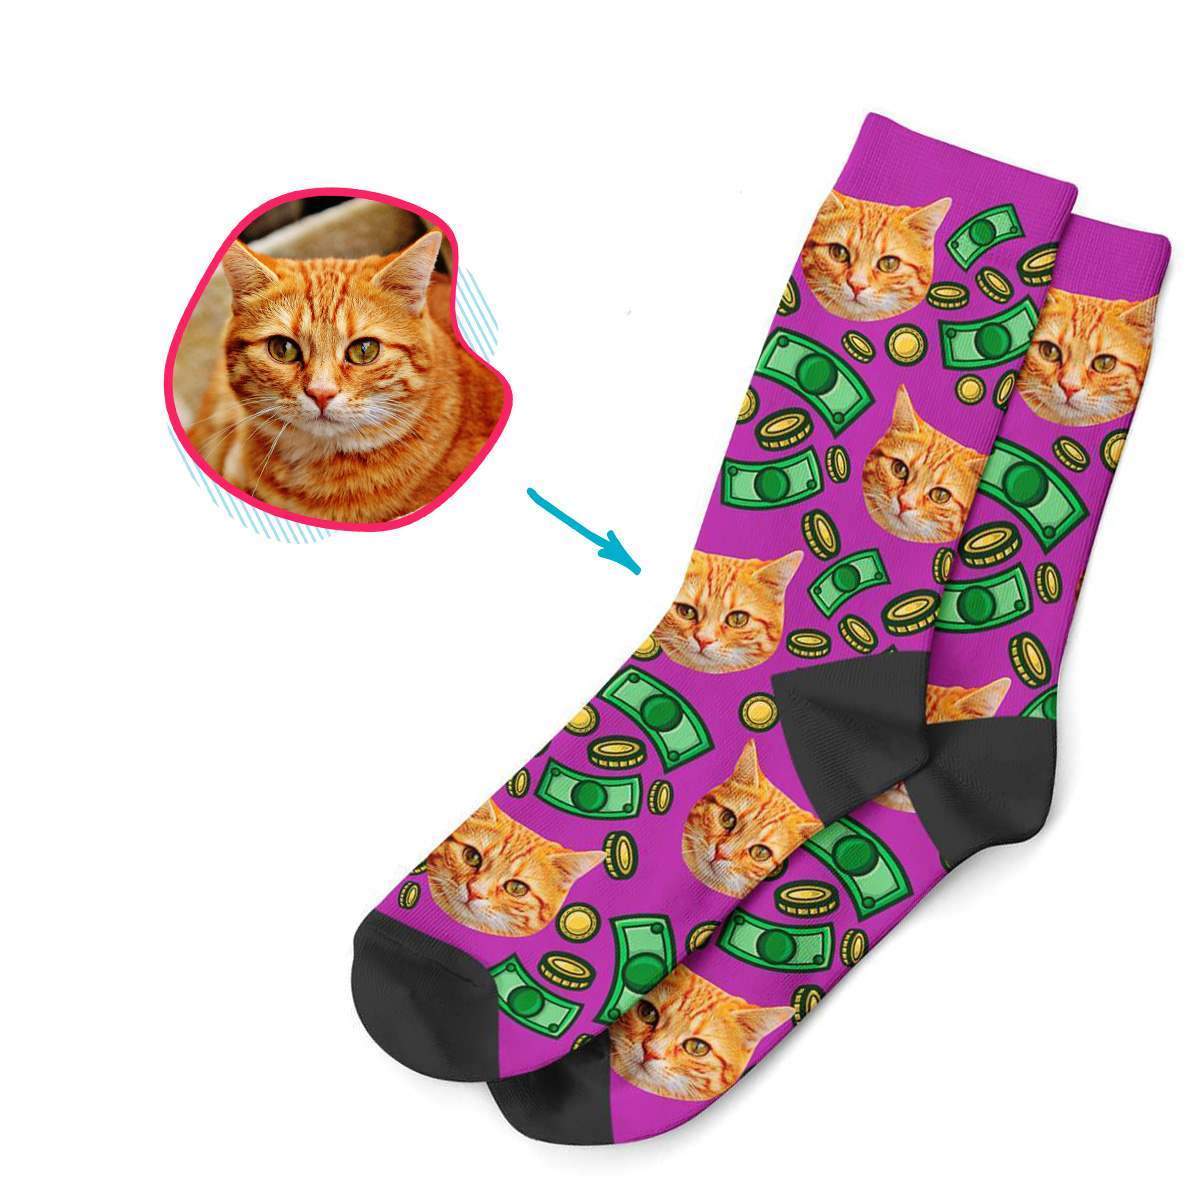 purple Money socks personalized with photo of face printed on them